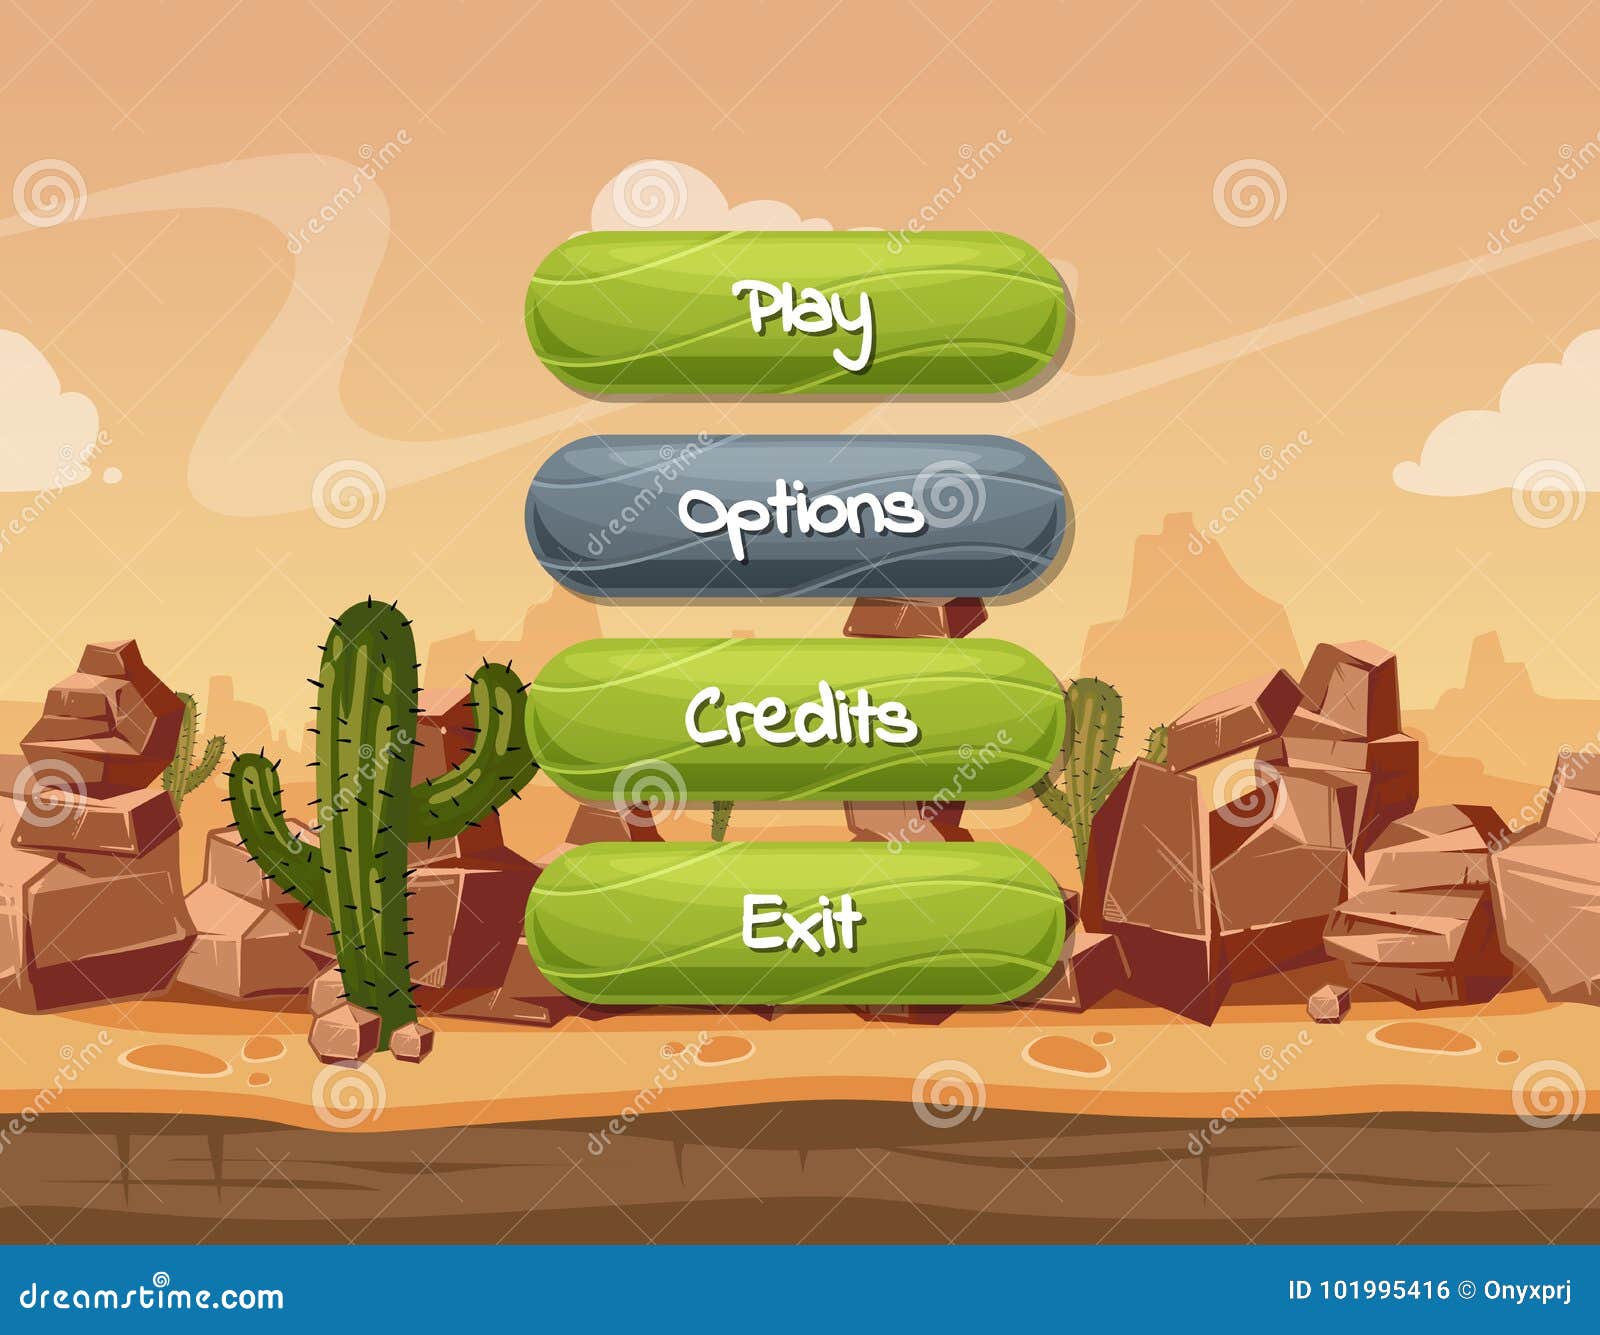  cartoon style wavy enabled and disabled buttons with text for game  on orange rocks, sky and cactus desert